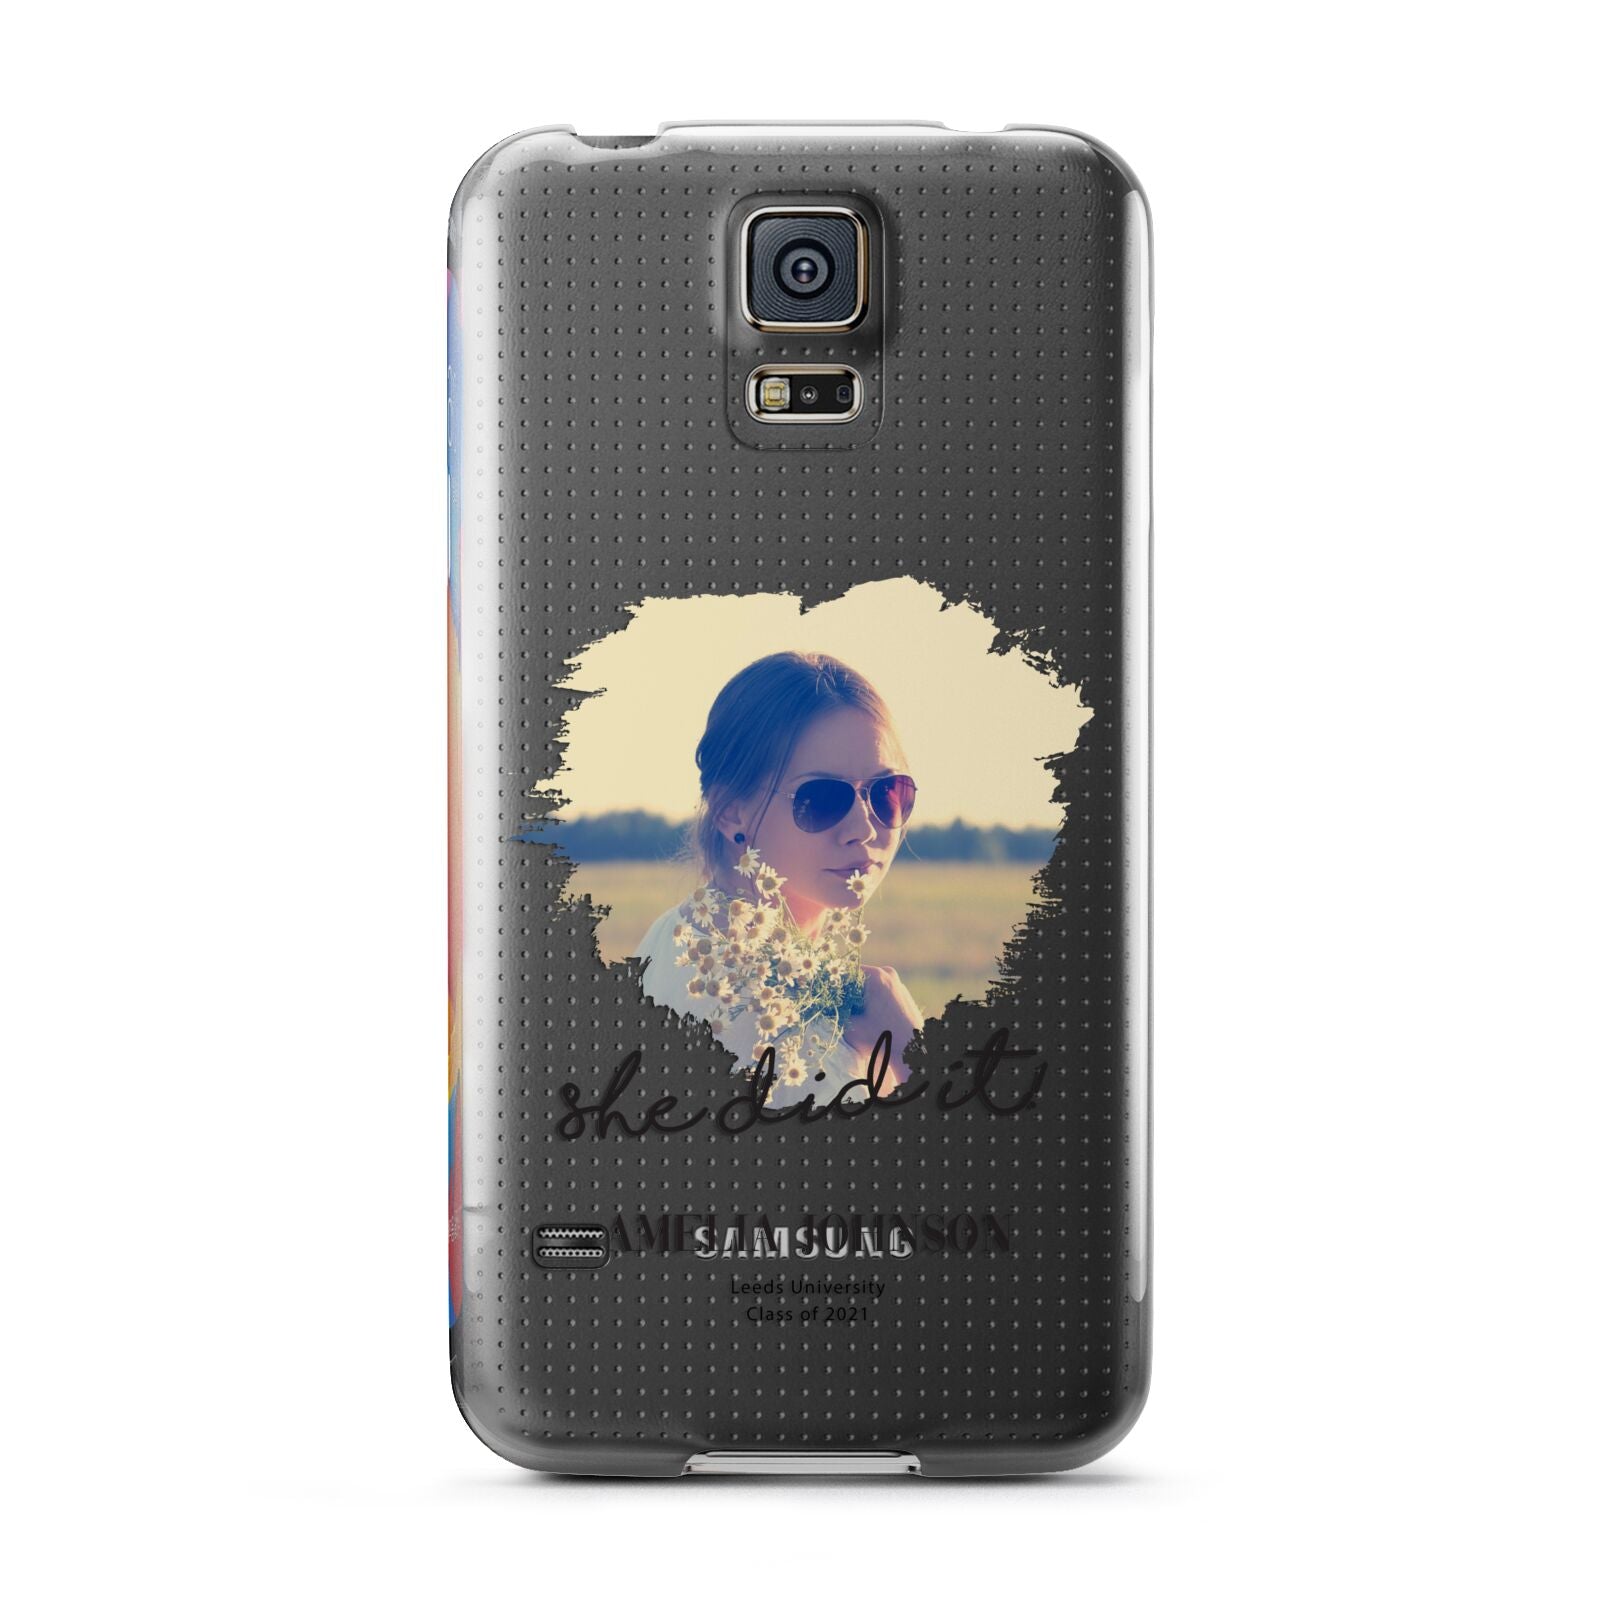 She Did It Graduation Photo with Name Samsung Galaxy S5 Case